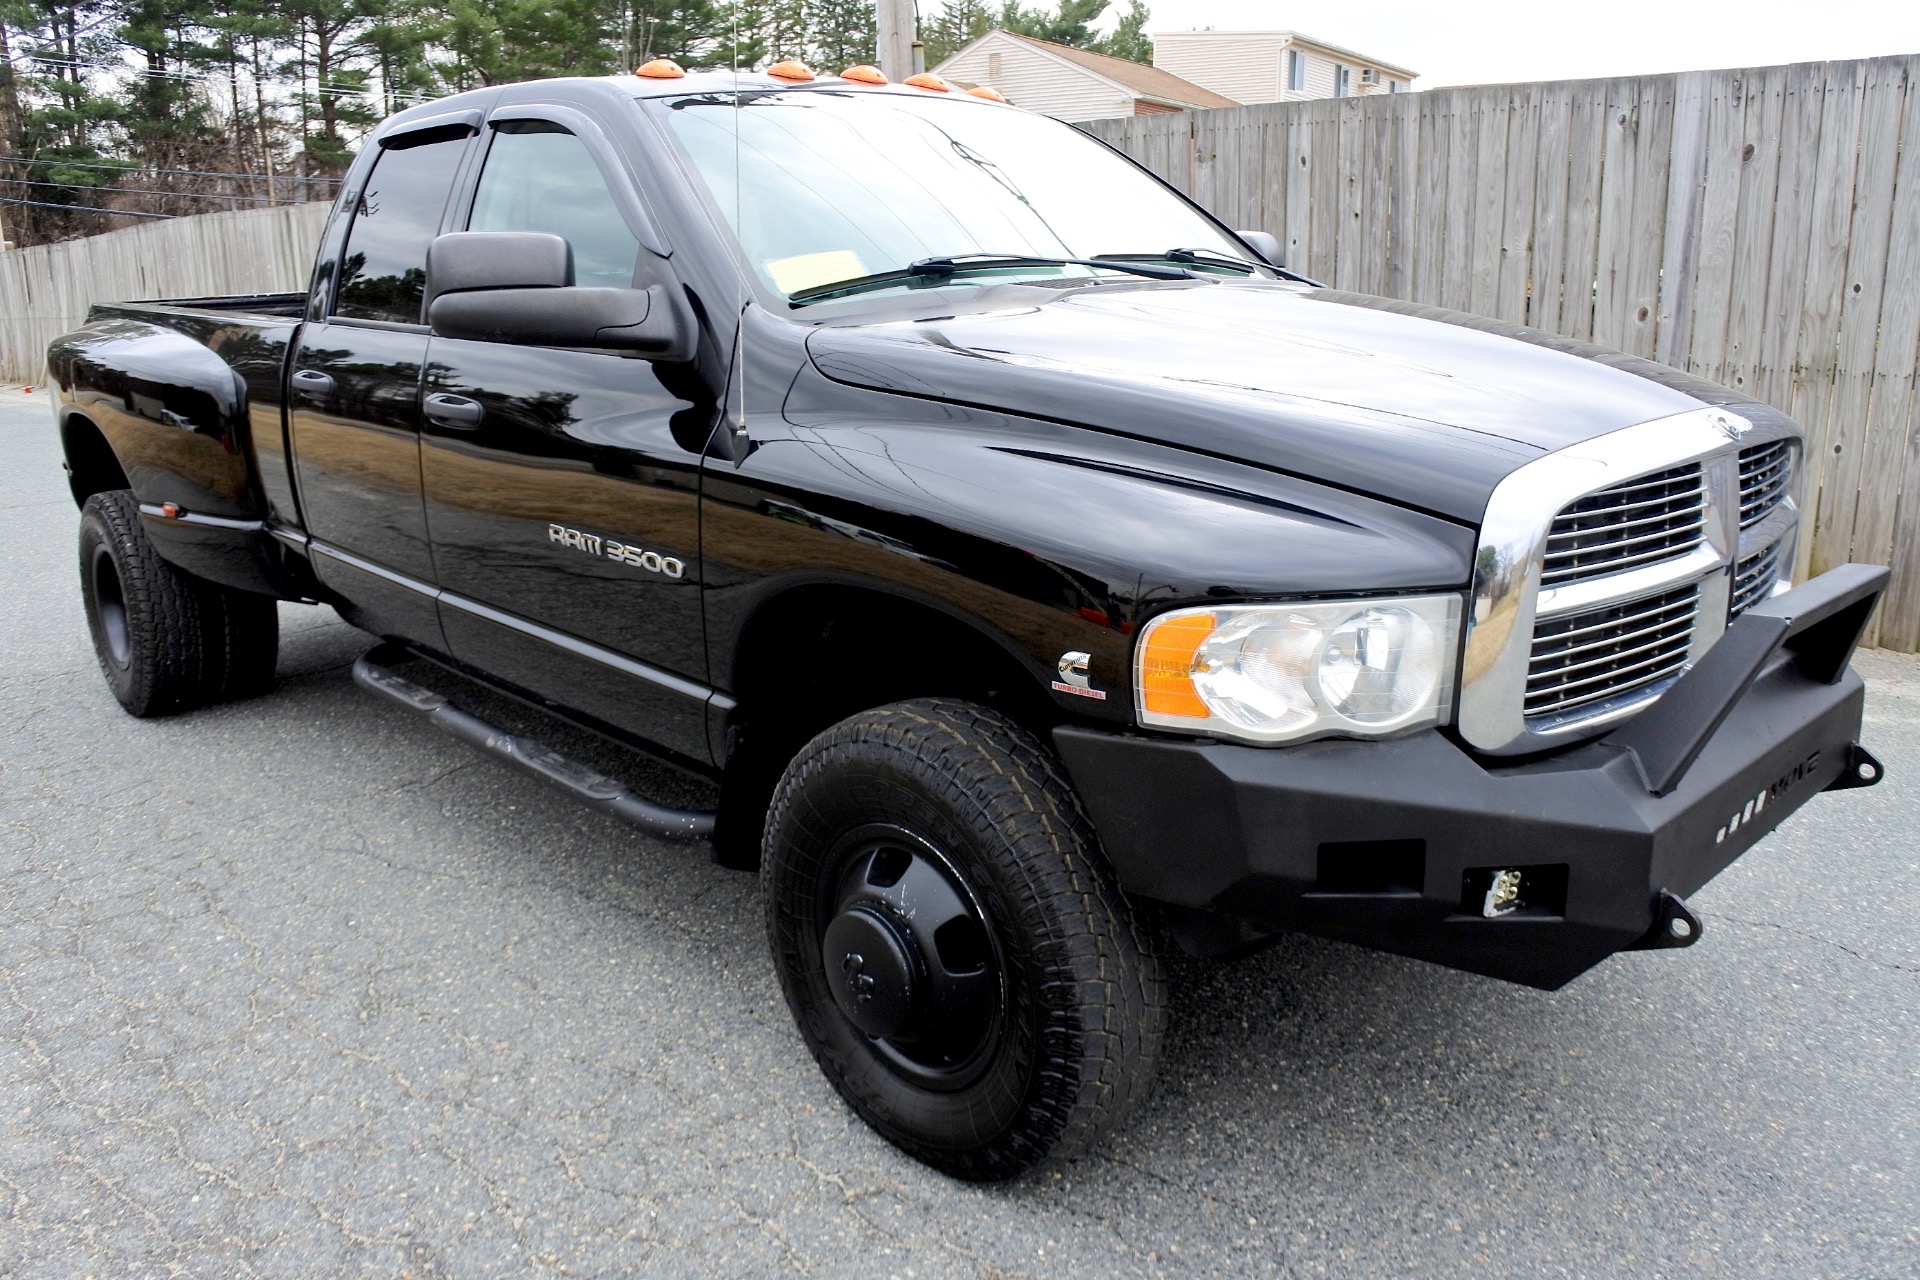 Used 2005 Dodge Ram 3500 4dr Quad Cab 160.5' WB DRW 4WD ST For Sale 2005 Dodge Ram 3500 Ac Recharge